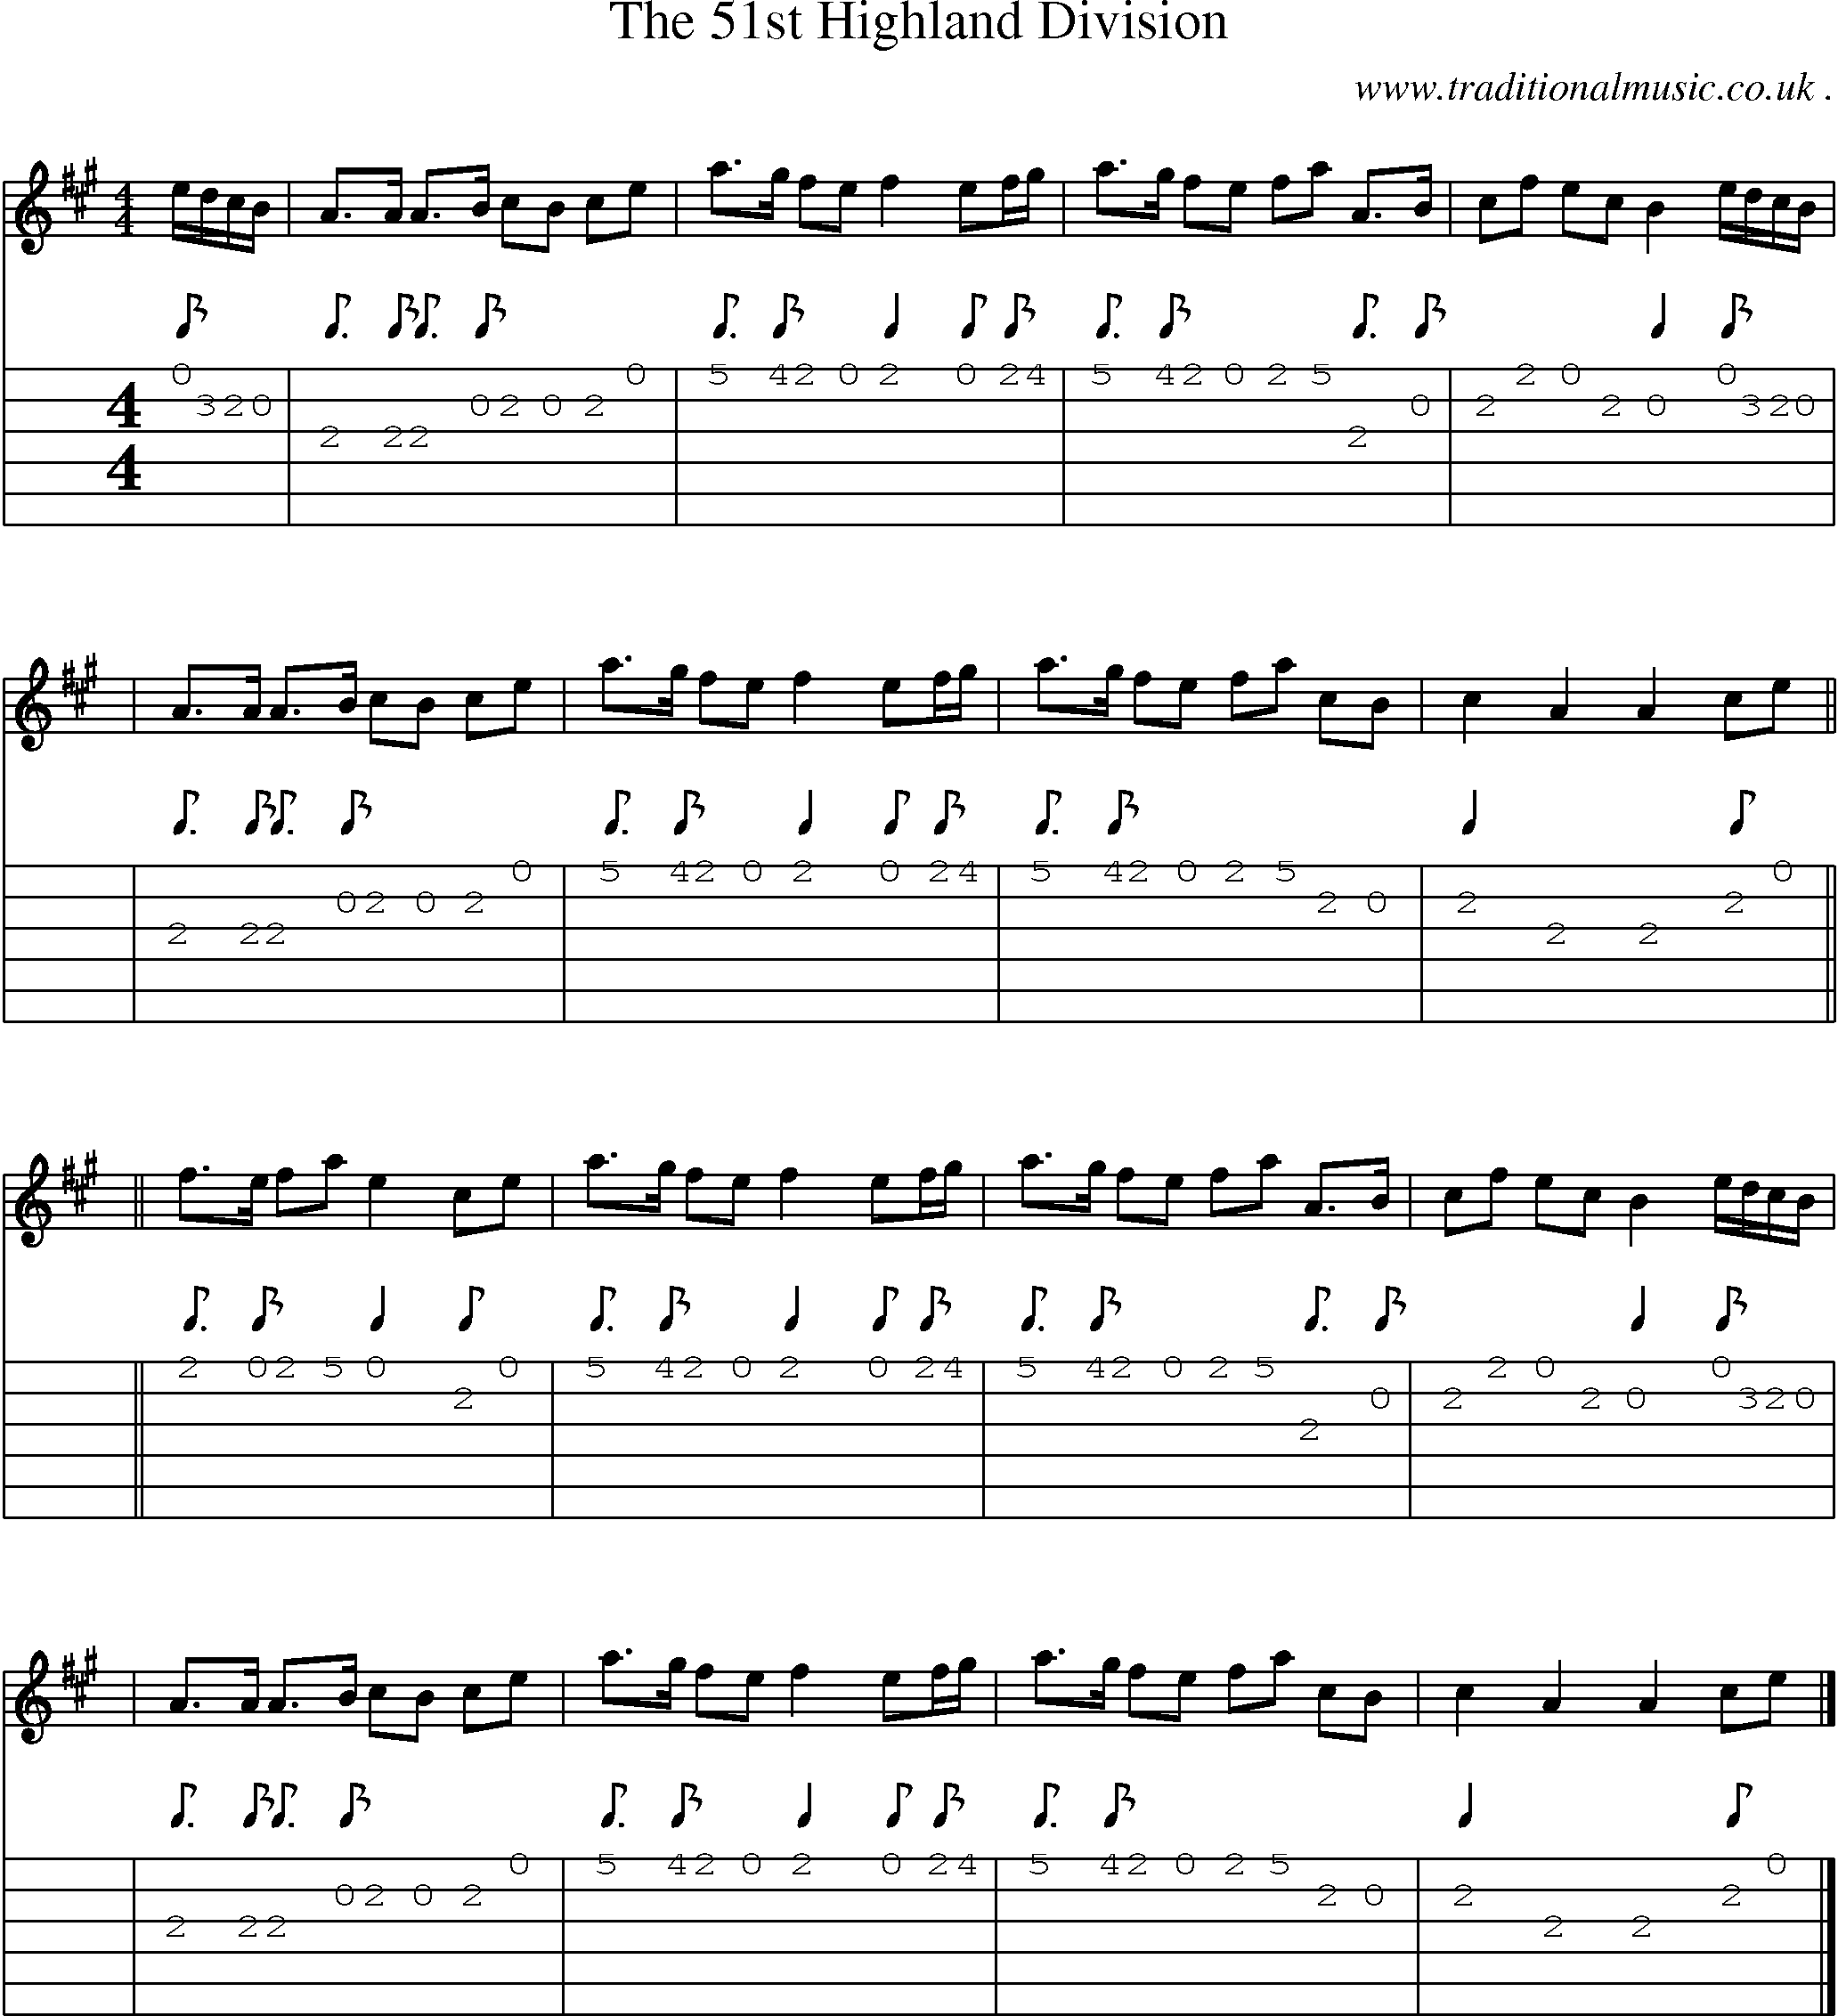 Sheet-music  score, Chords and Guitar Tabs for The 51st Highland Division